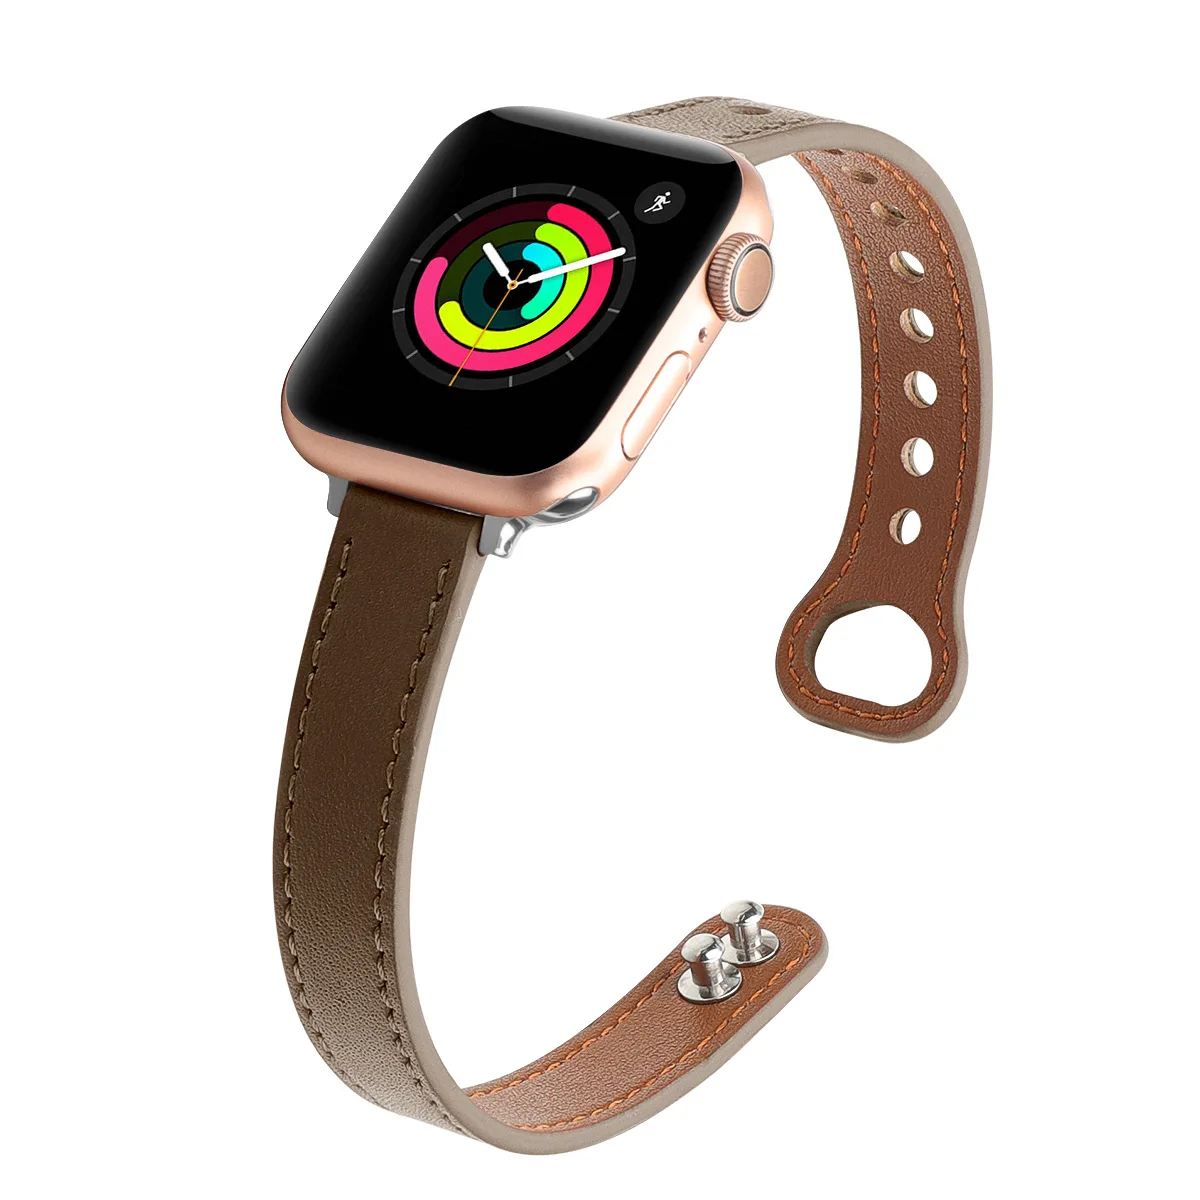 Suitable for Apple Watch Leather Strap Leather Superfine Double Stud Strap enlarge